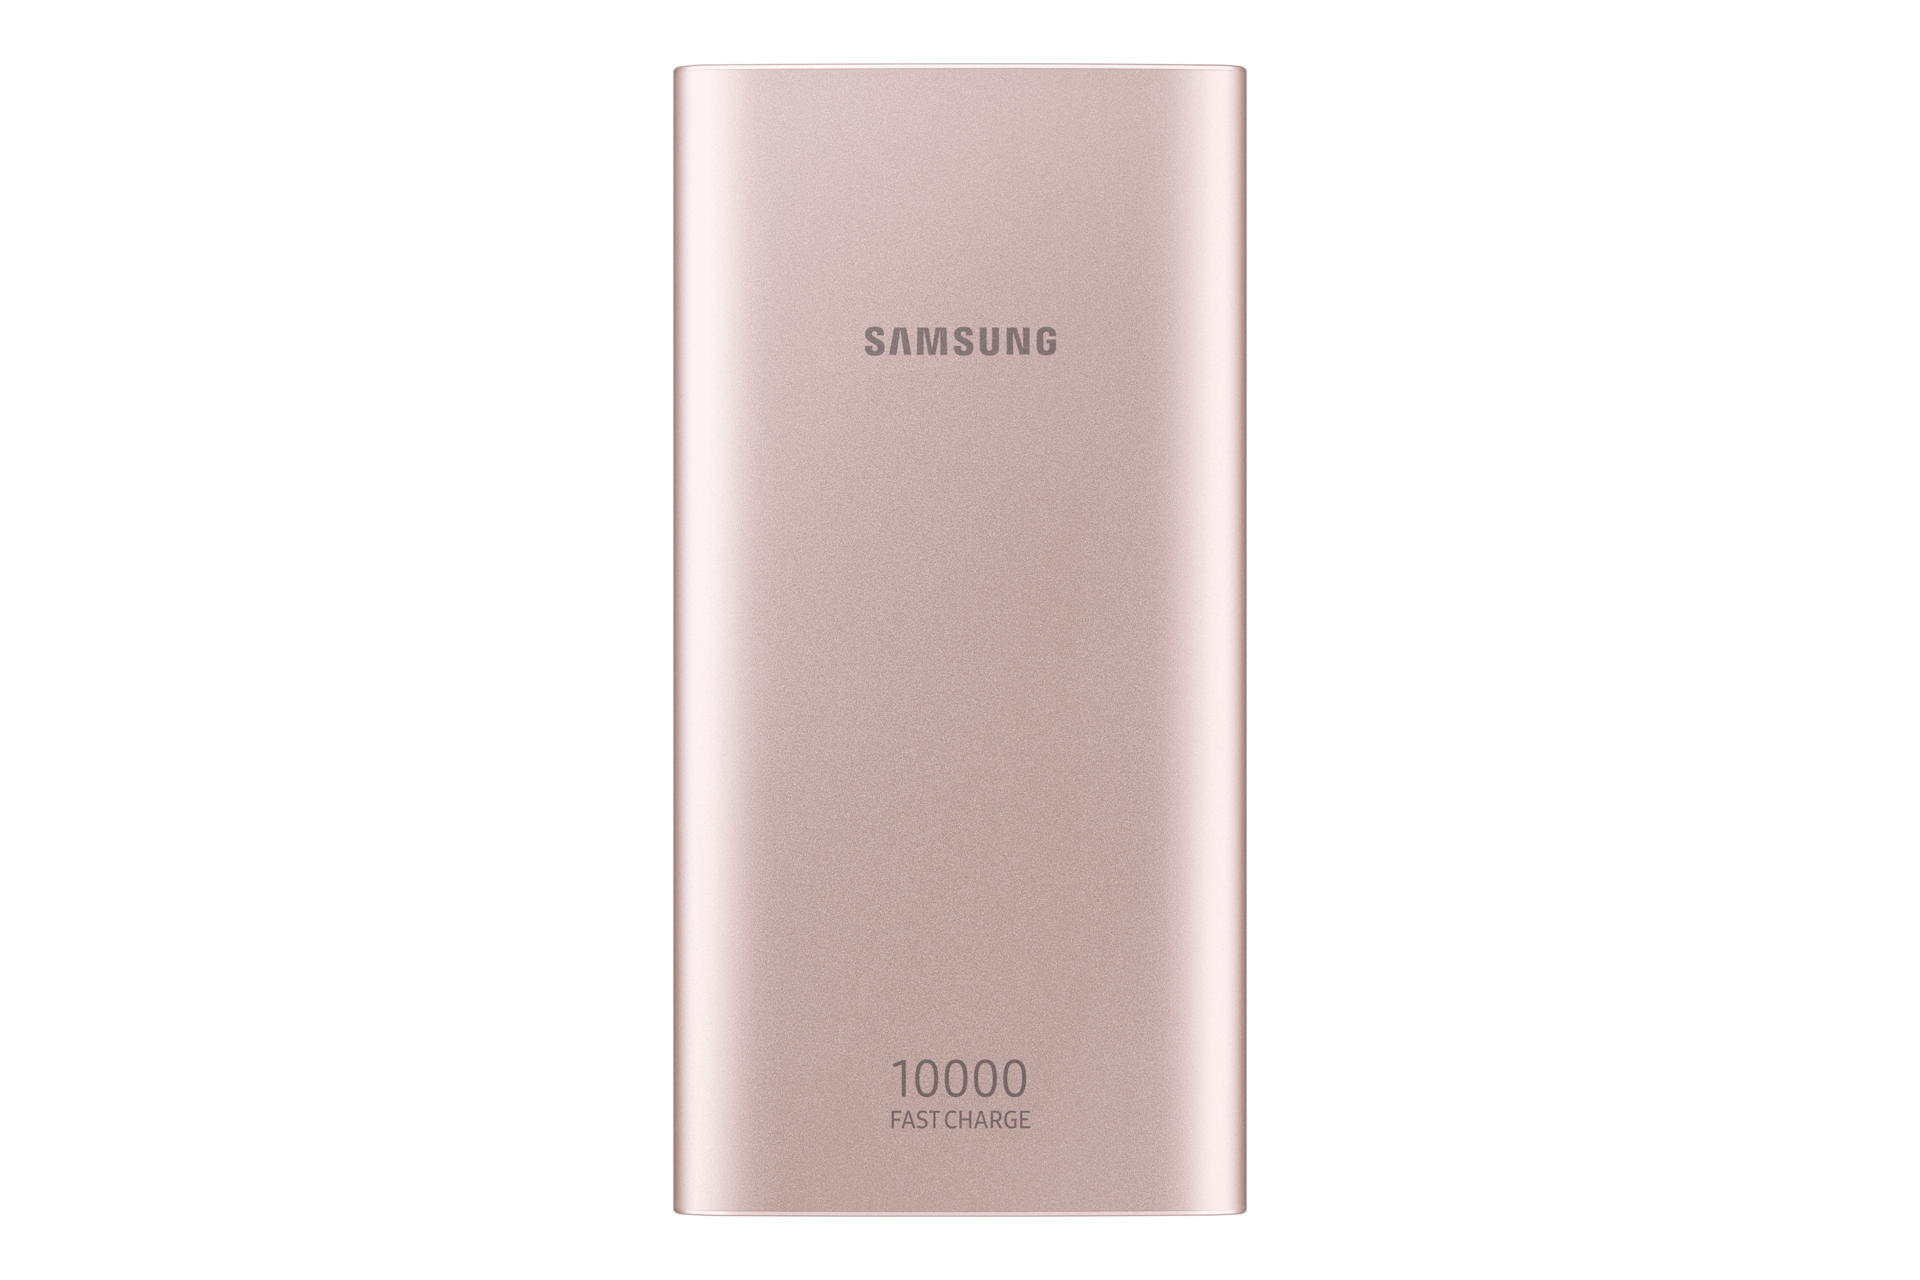 https://images.samsung.com/is/image/samsung/in-battery-pack-eb-p1100b-eb-p1100bpngin-frontmartianpink-125177401?$650_519_PNG$